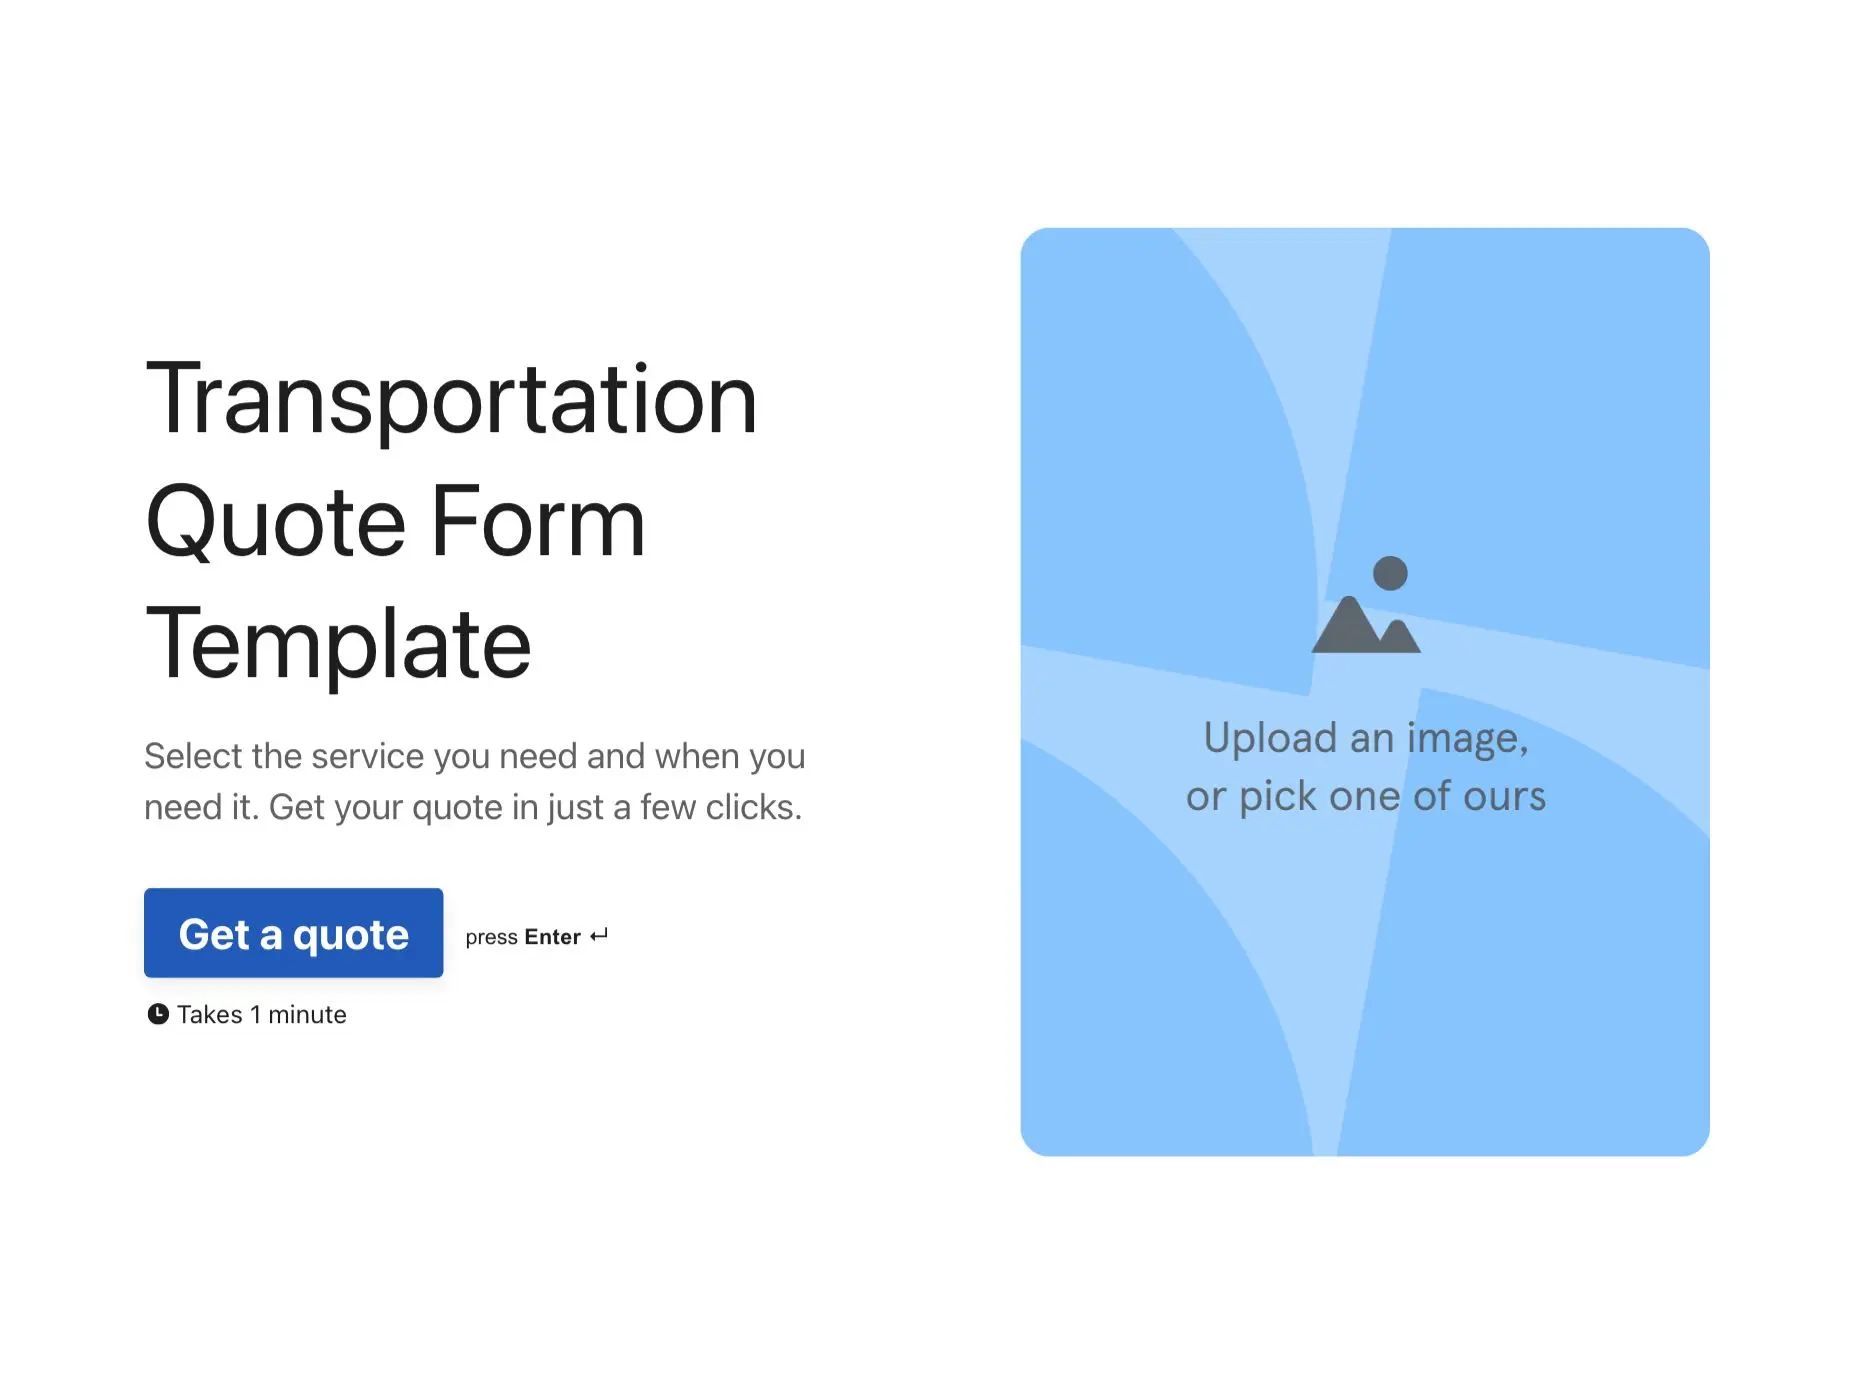 Transportation Quote Form Template Hero